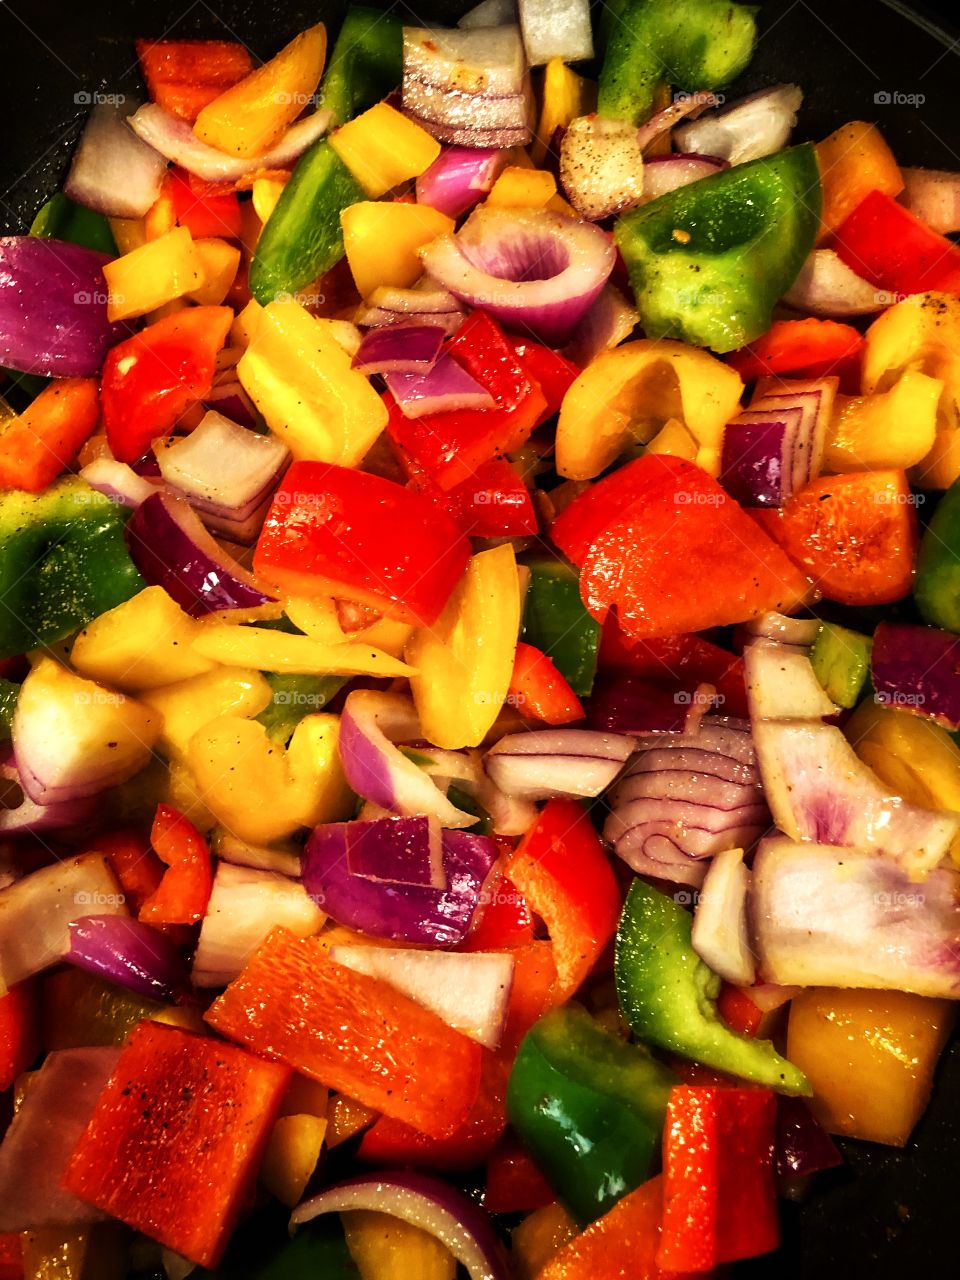 Clash of colors chopped and cooking red yellow green bell peppers and purple onion meal prep 